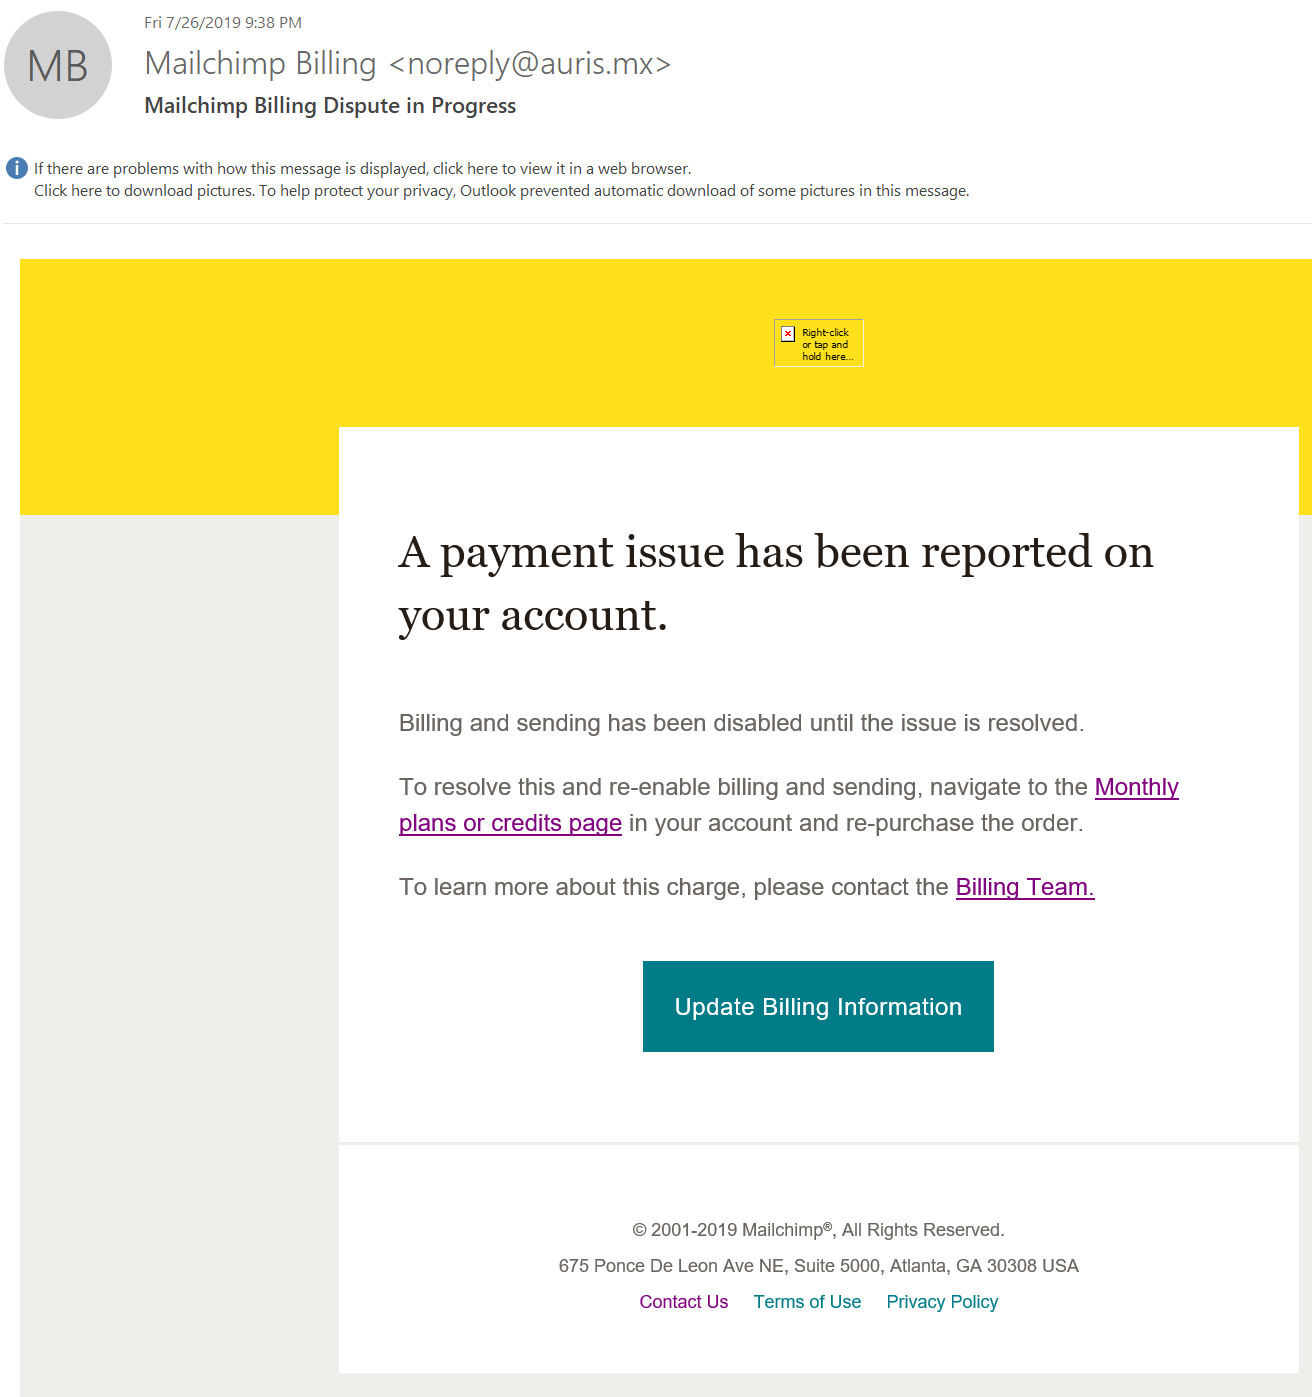 A payment issue has been reported on your account - Mail Chimp Spam !!!